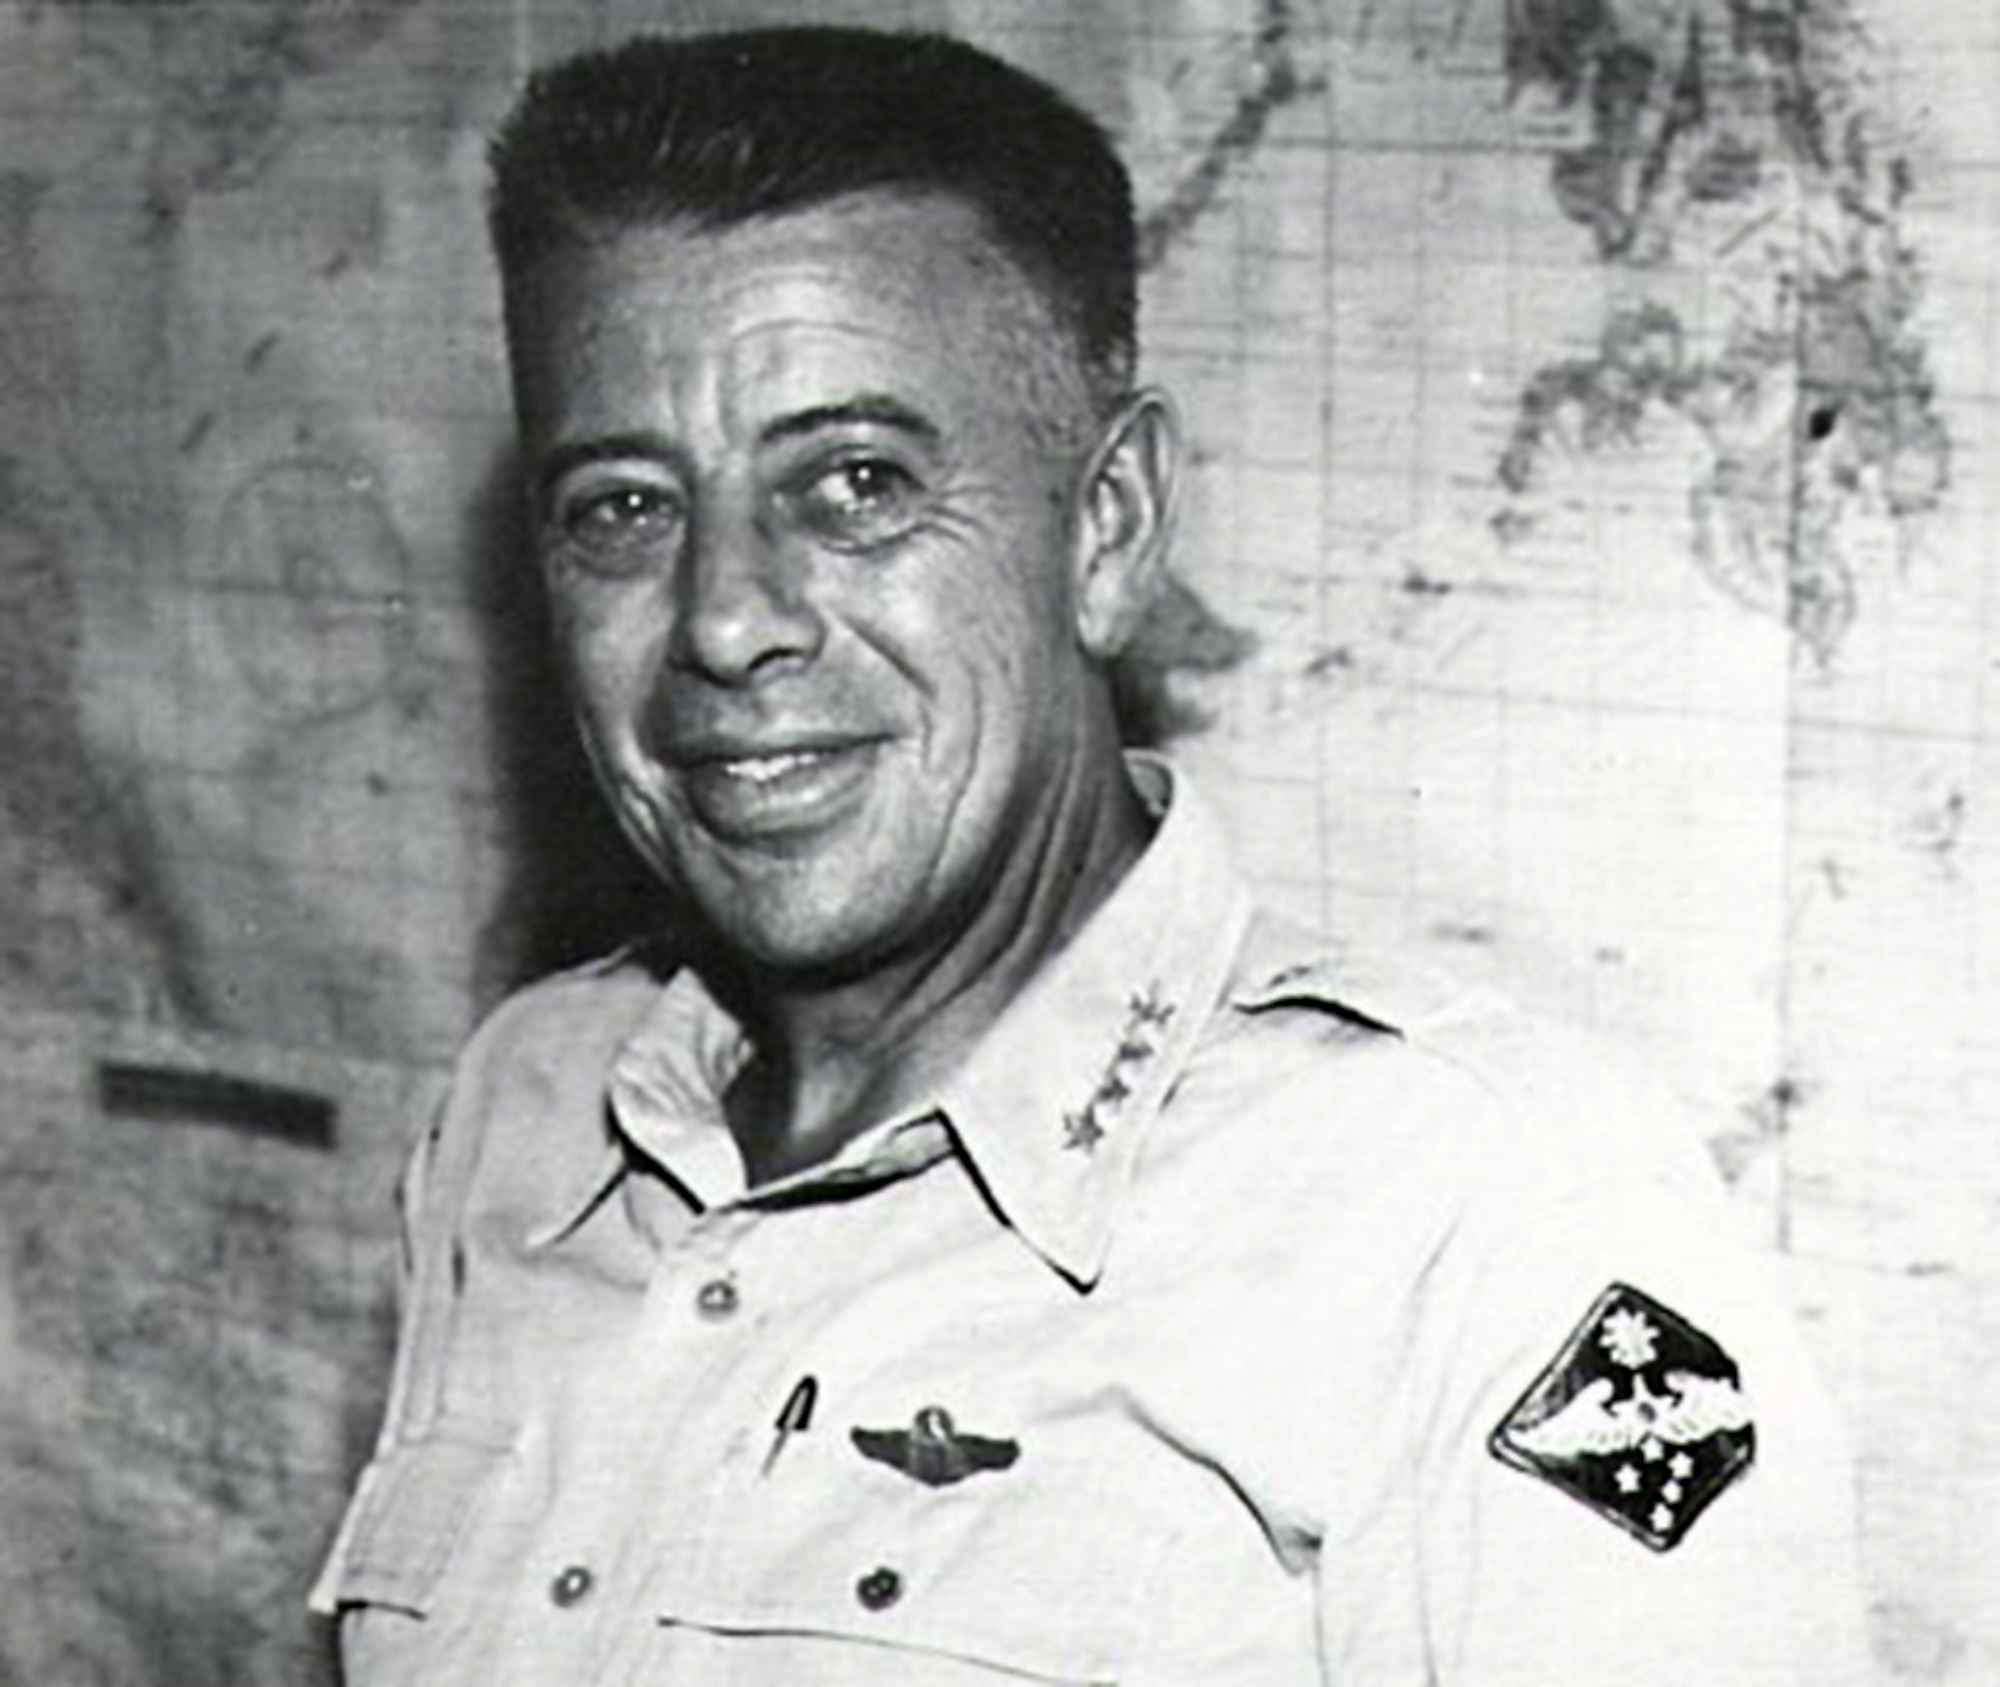 FILE PHOTO -- In July 1942, Gen. George C. Kenney was the Allied Air Forces commanding general in the Southwest Pacific and Fifth Air Force commanding general, joining Gen. Douglas MacArthur as his top air officer.  He died in 1977.  Pacific Air Forces officials established the George C. Kenney Headquarters (Provisional) at Hickam Air Force Base, Hawaii, on June 1.  The headquarters will focus exclusively on planning and executing military operations throughout the Pacific theater, excluding the Korean Peninsula.  (U.S. Air Force photo)
